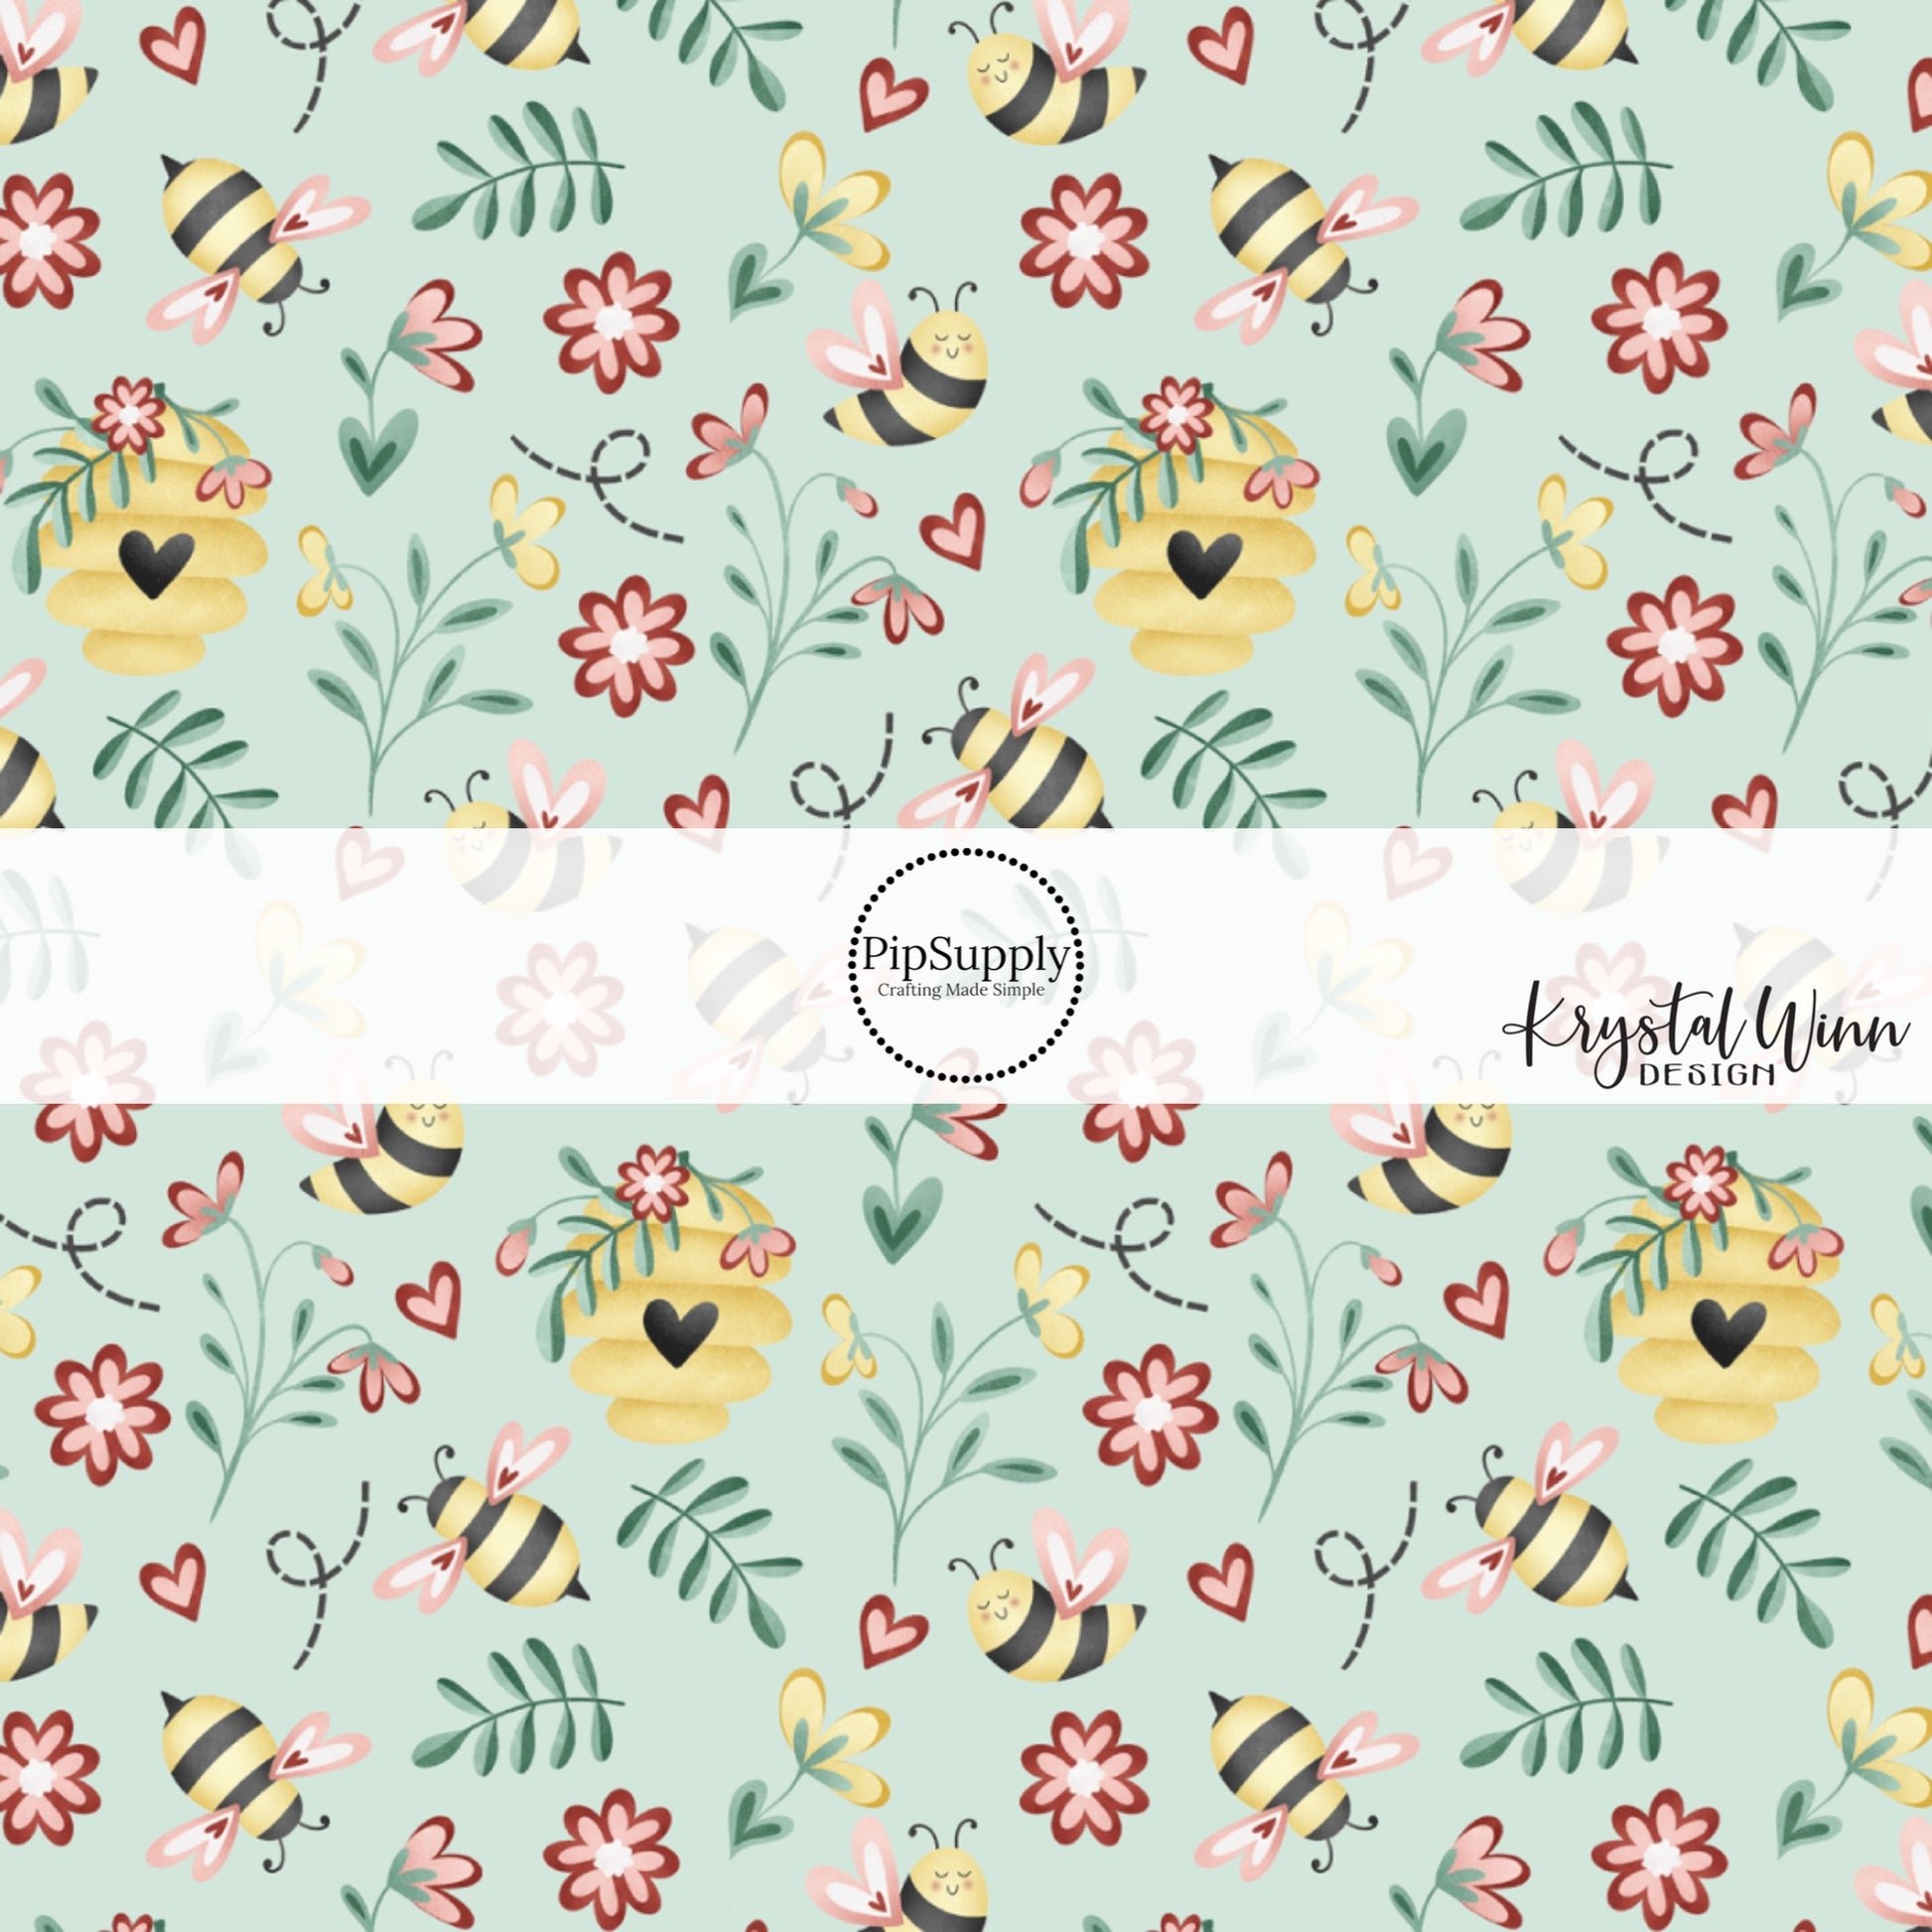 Aqua Fabric by the yard with bumblebees, hearts, and flowers